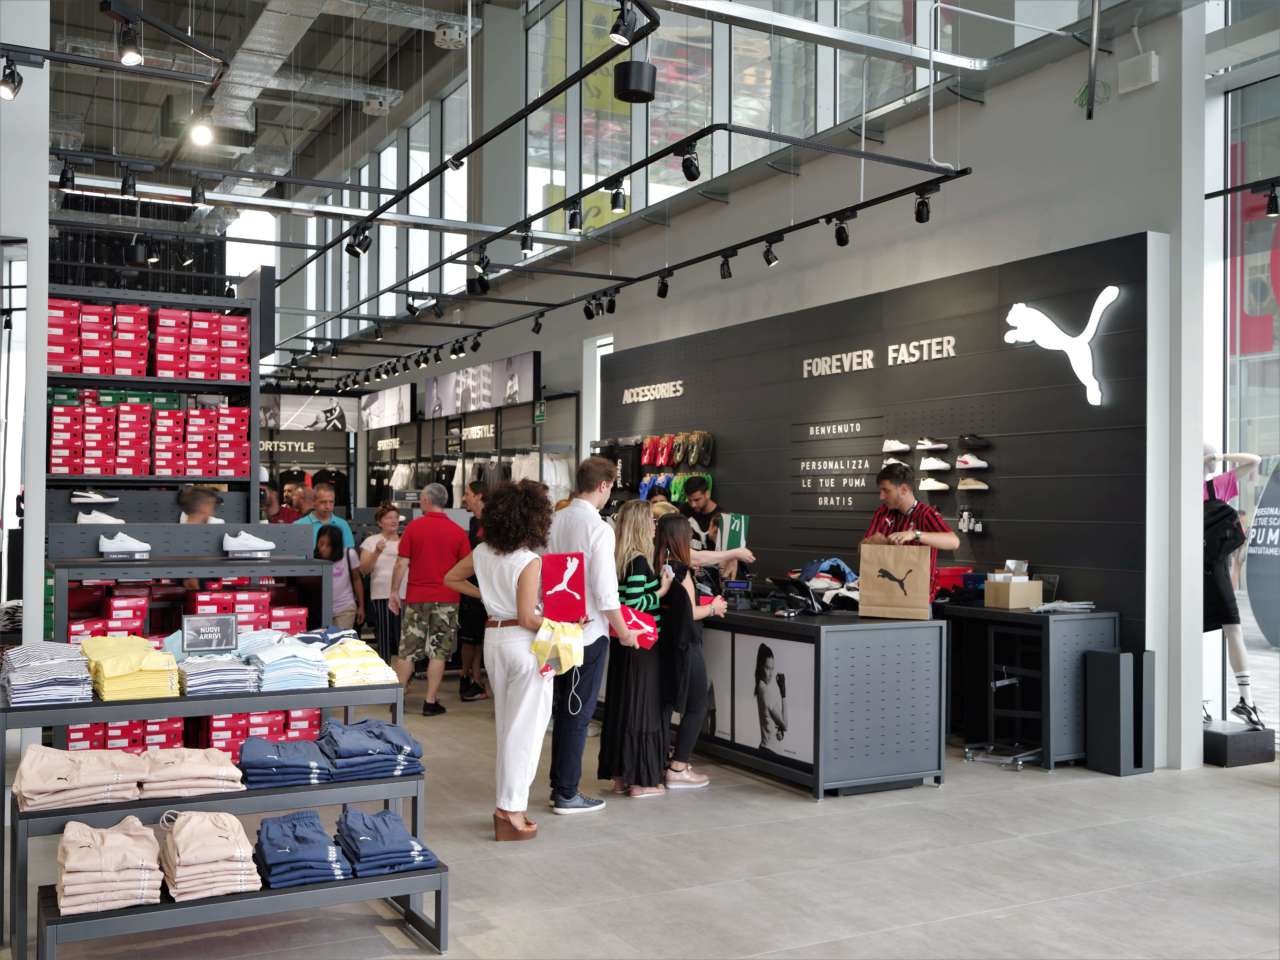 outlet store puma